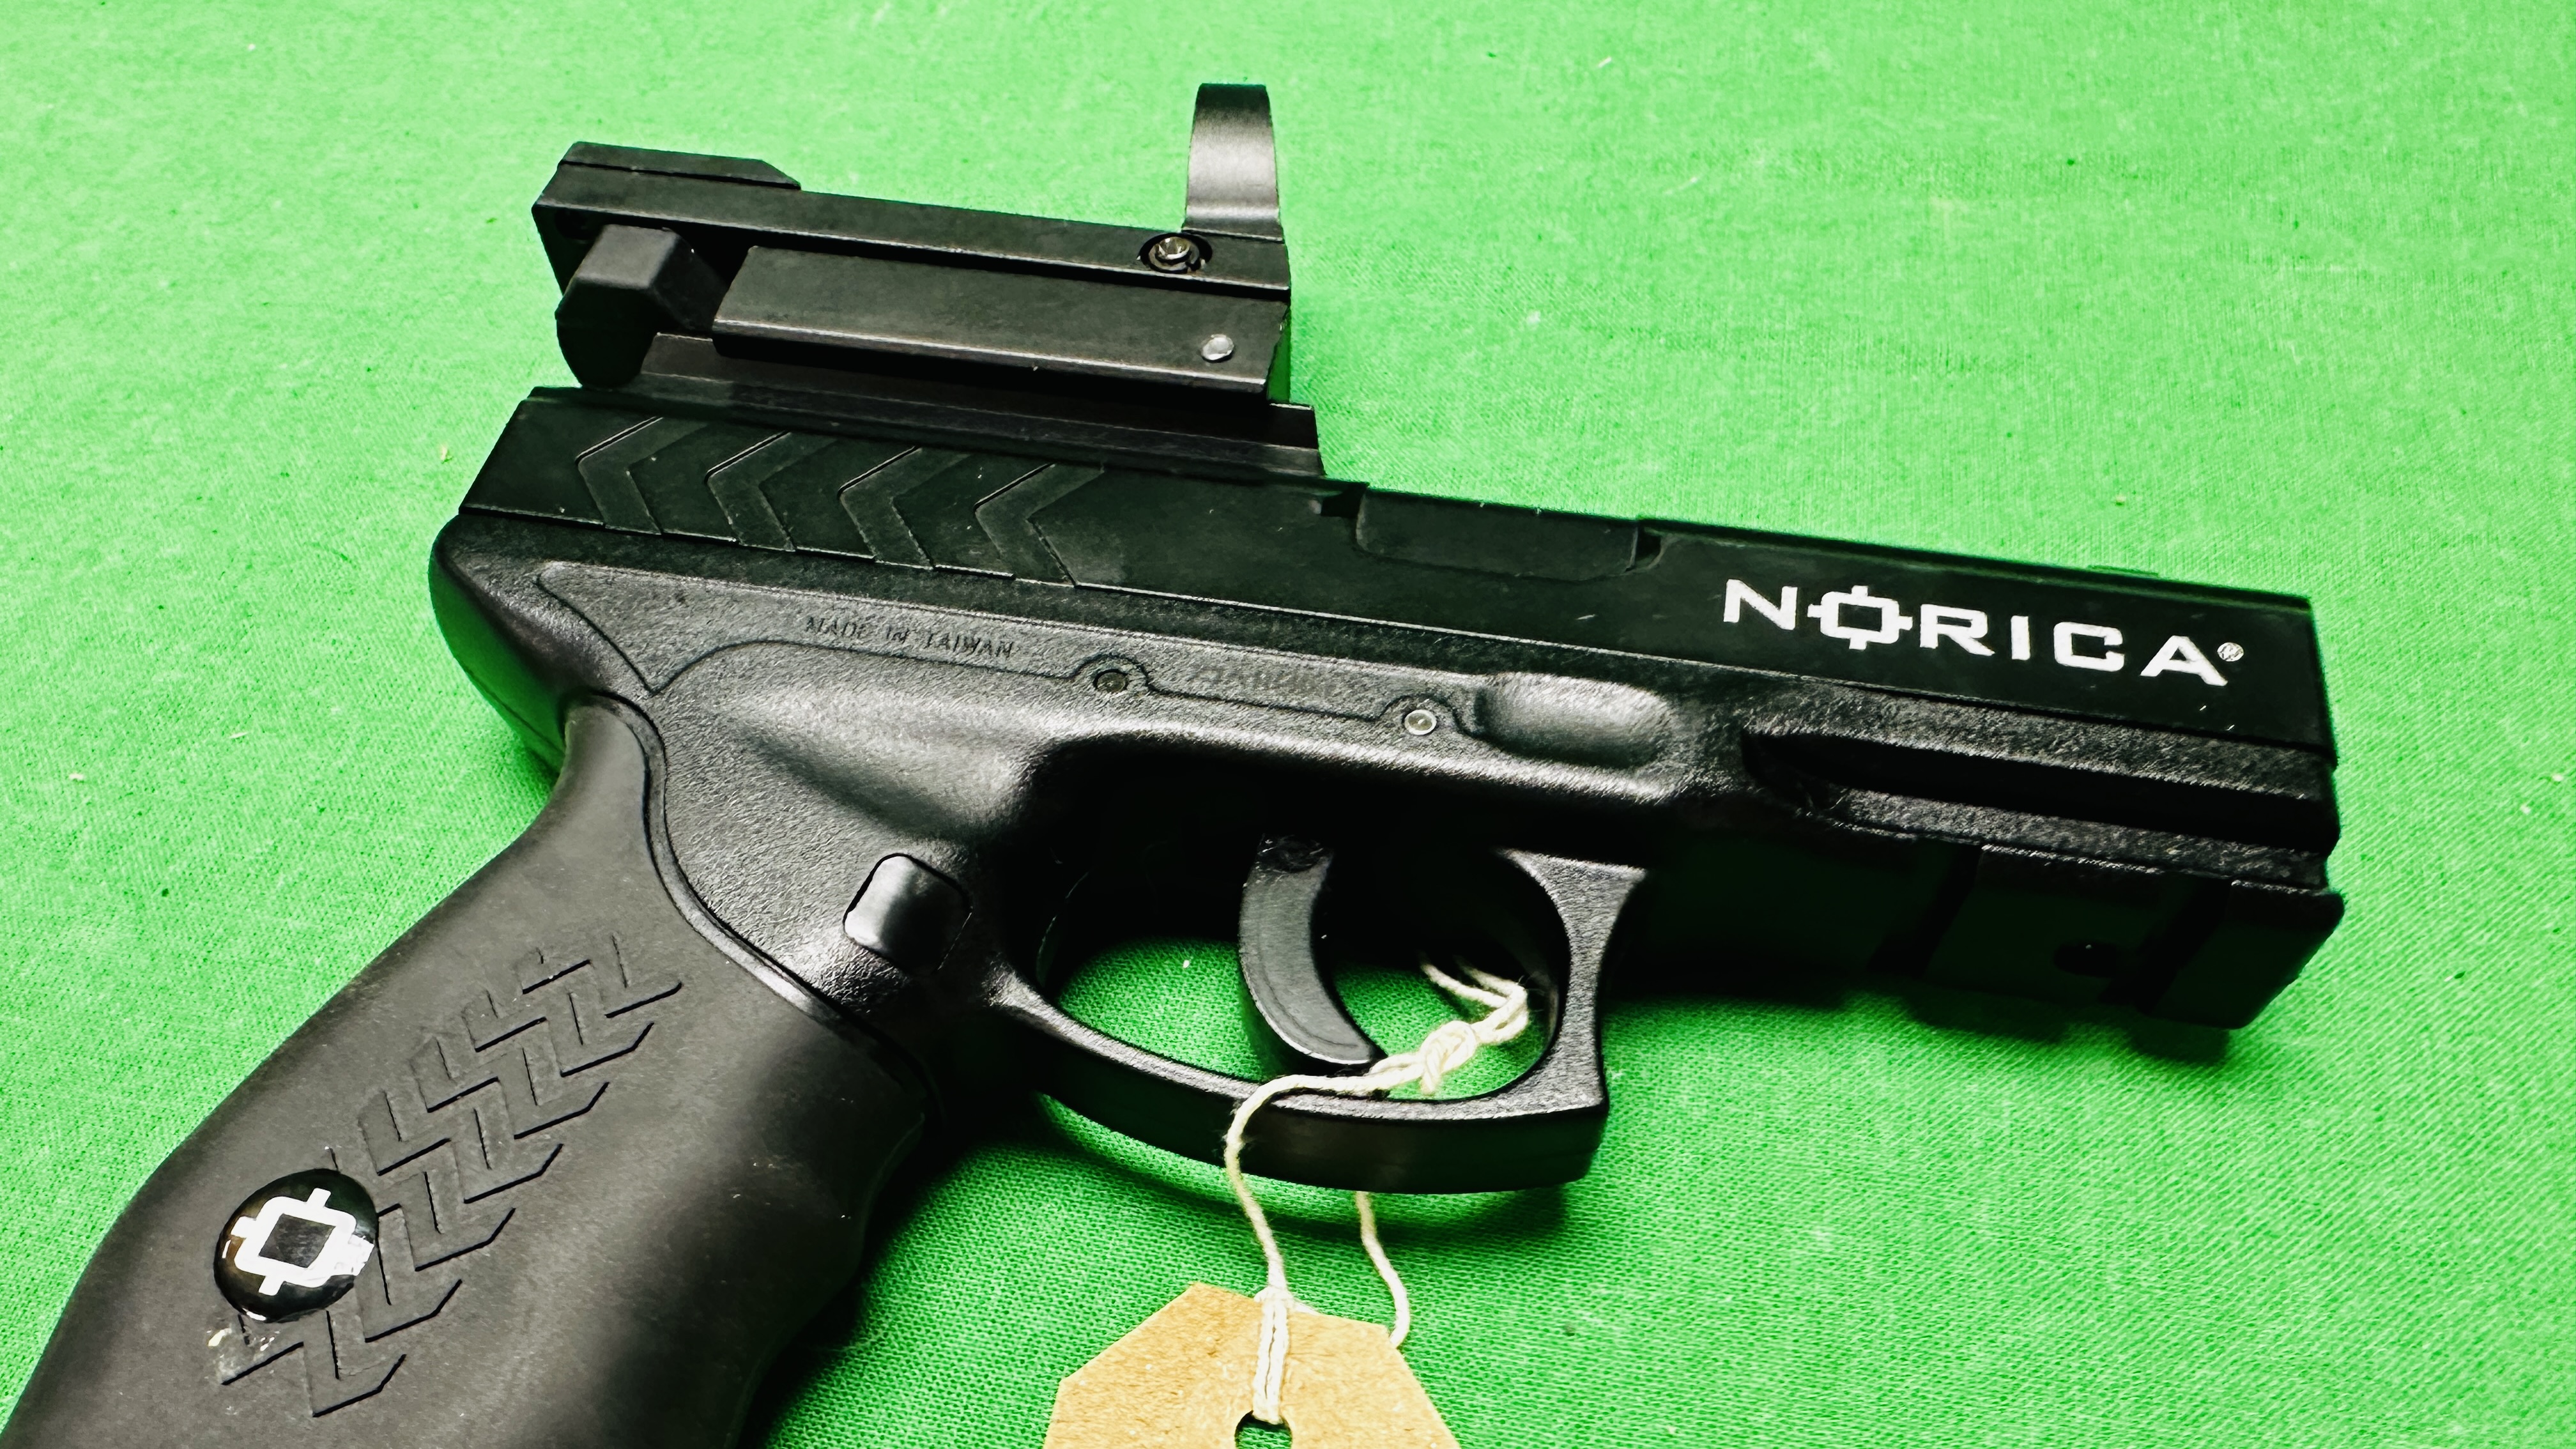 NORICA NAC 2021 CO2 MULTI SHOT AIR PISTOL COMPLETE WITH SIGHT - (ALL GUNS TO BE INSPECTED AND - Image 4 of 9